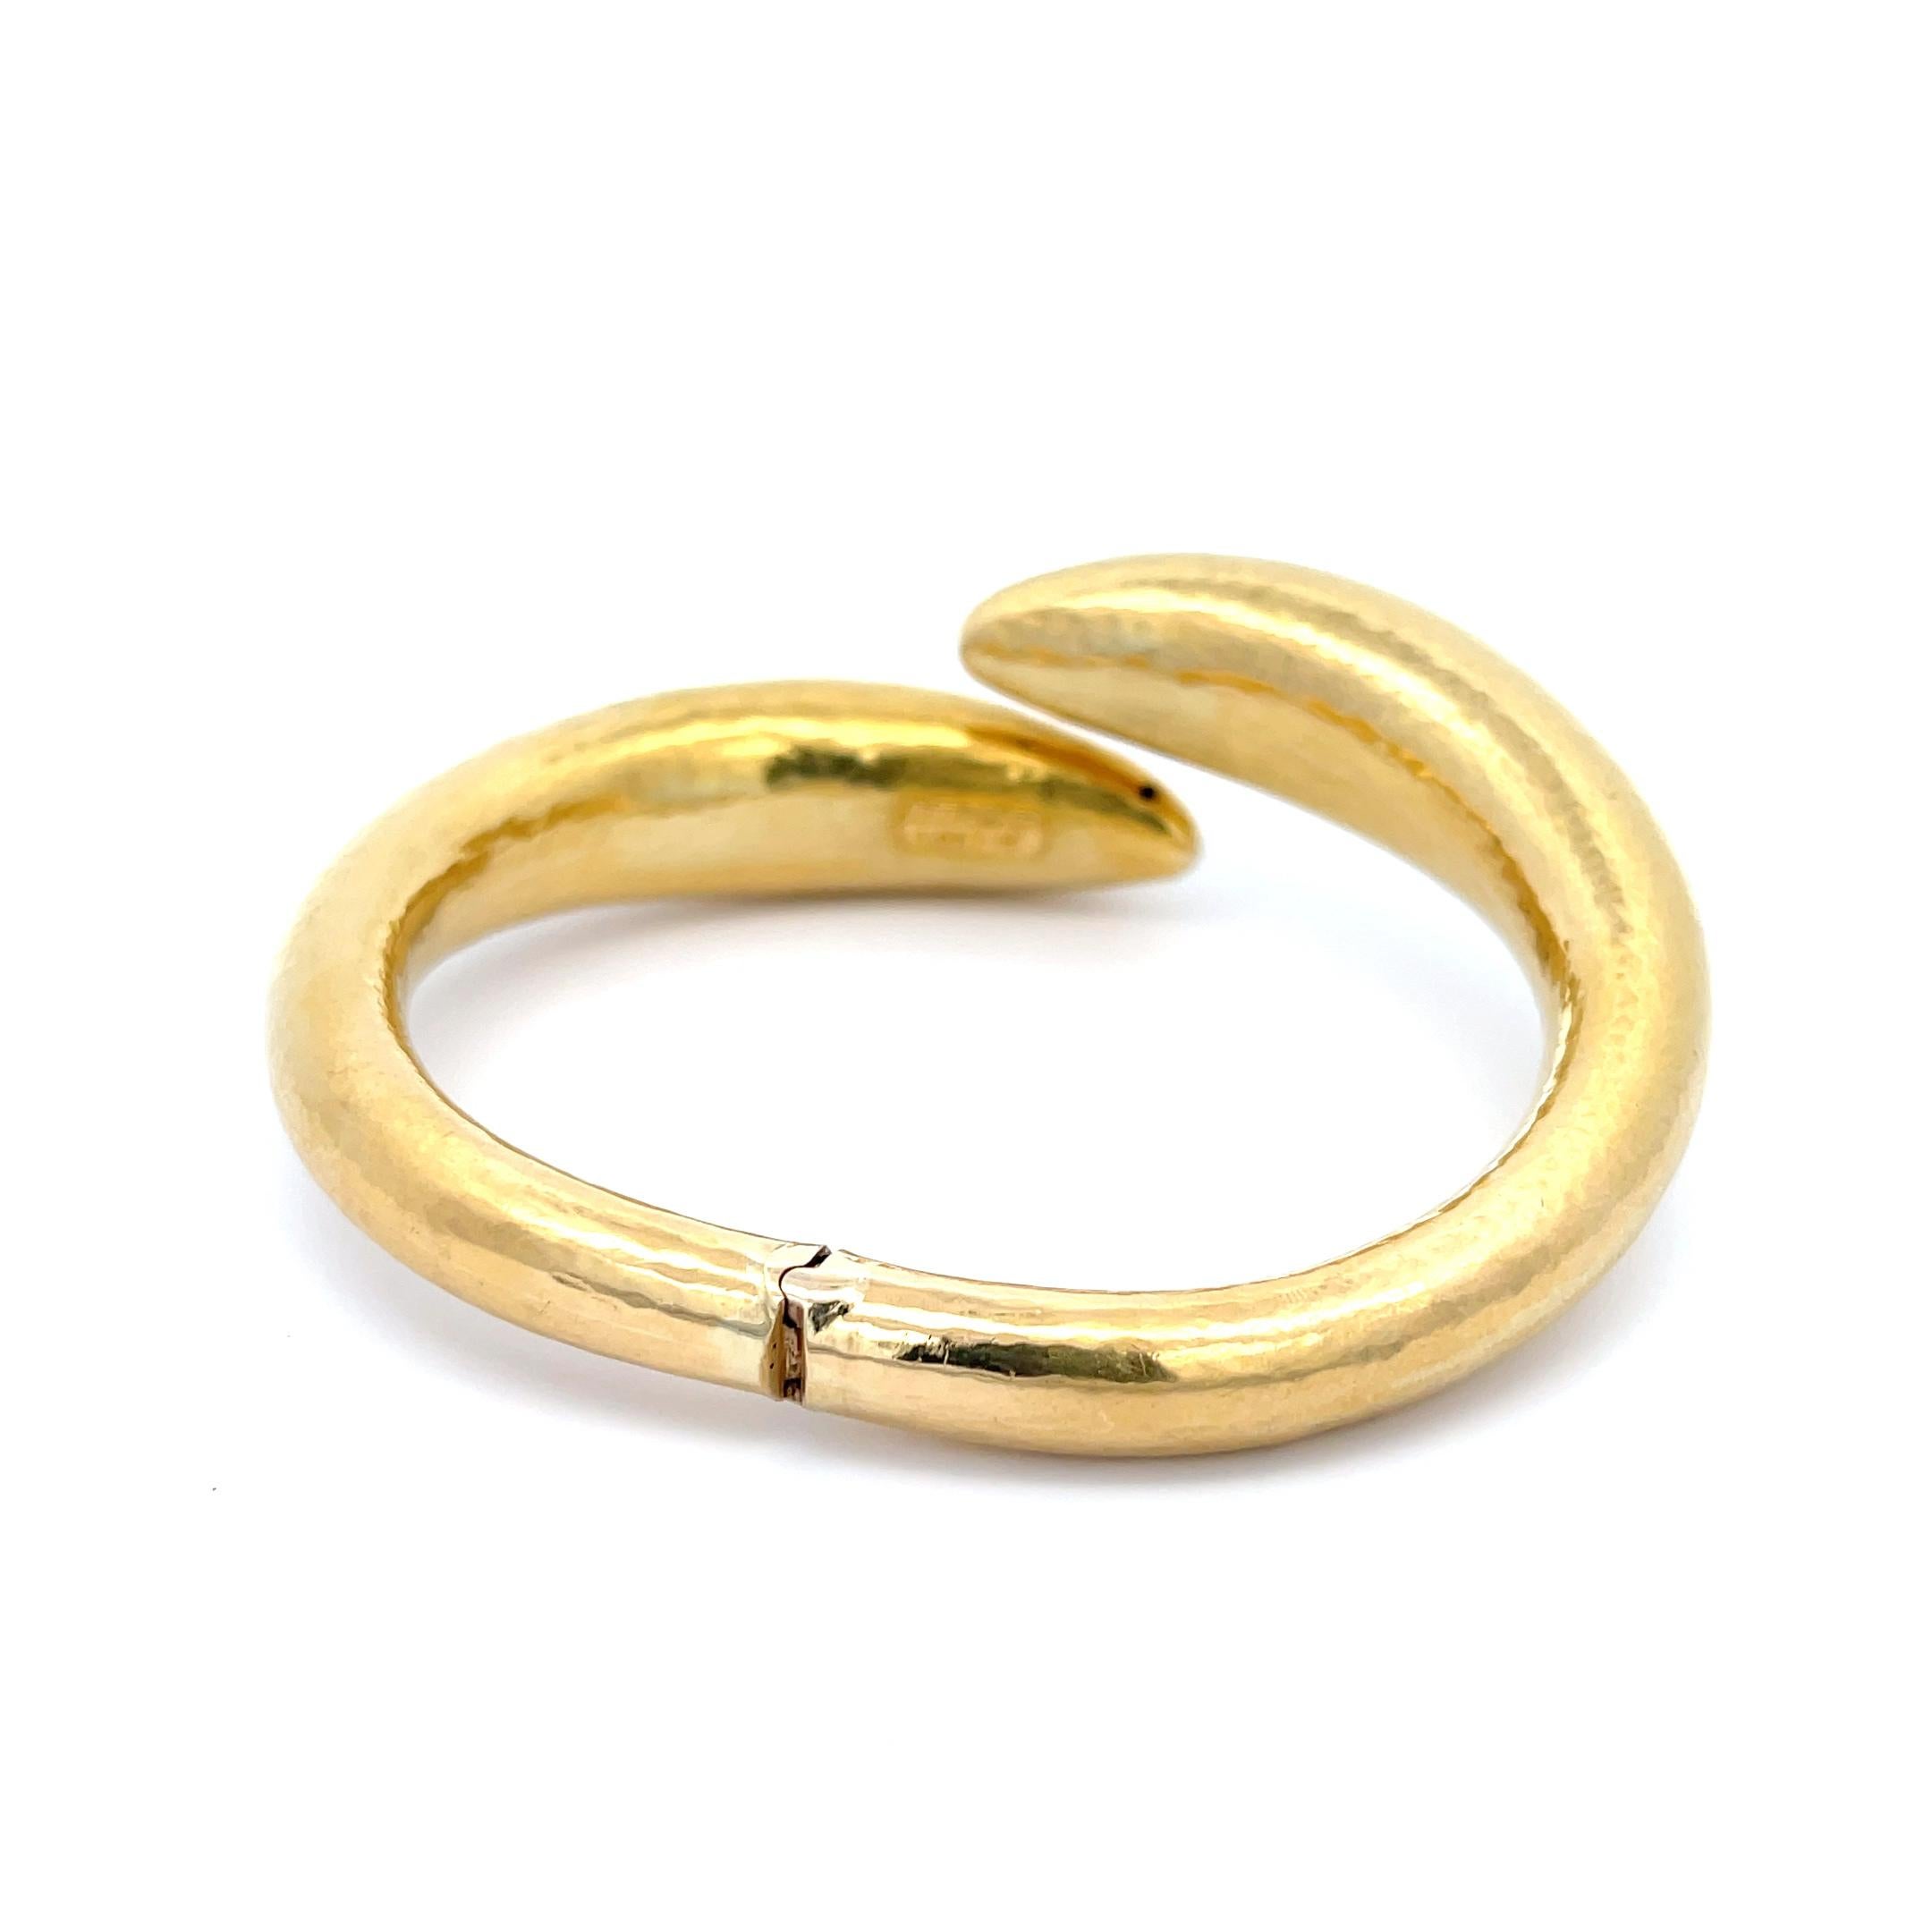 Lalaounis Hinged Cuff Bracelet 22K Yellow Gold In Excellent Condition For Sale In Dallas, TX